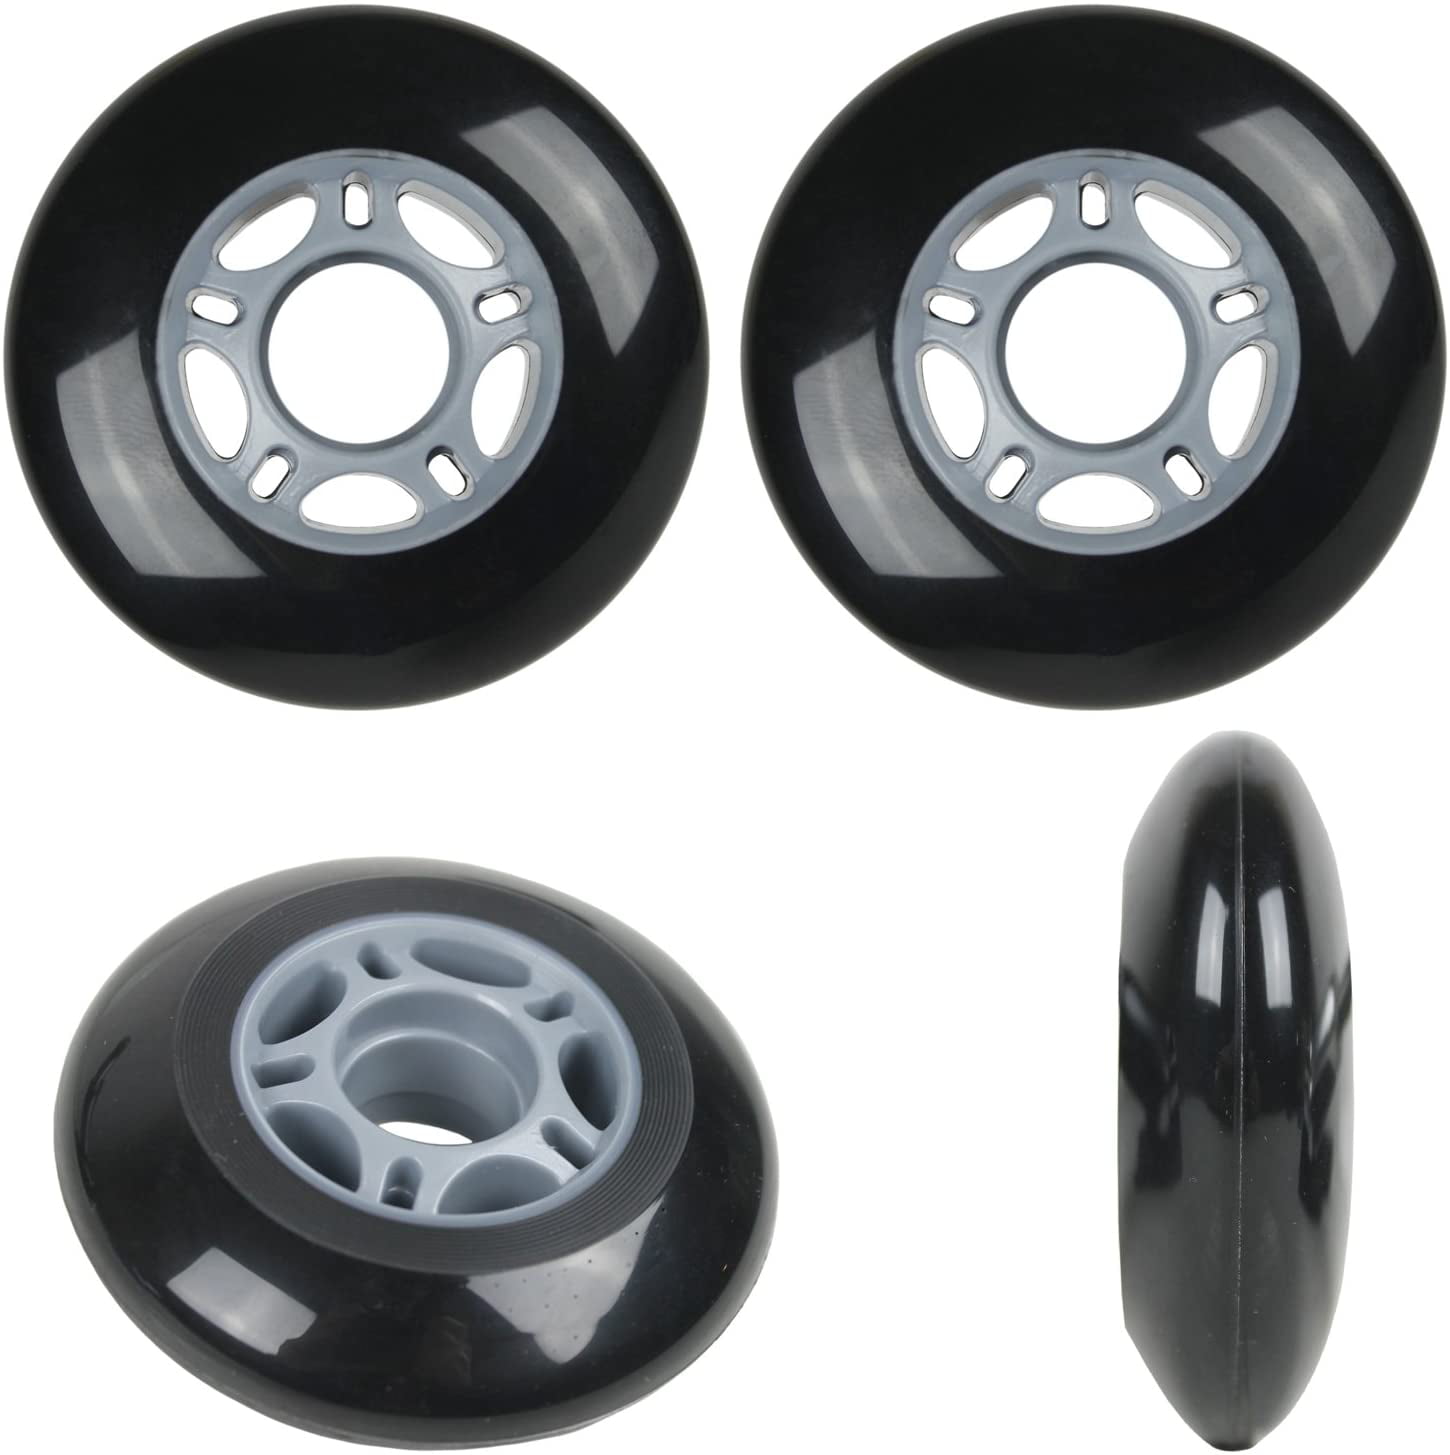 4-Pack NEW Outdoor Rollerblade Inline Hockey Fitness Skate Wheels 68mm  / 82A 